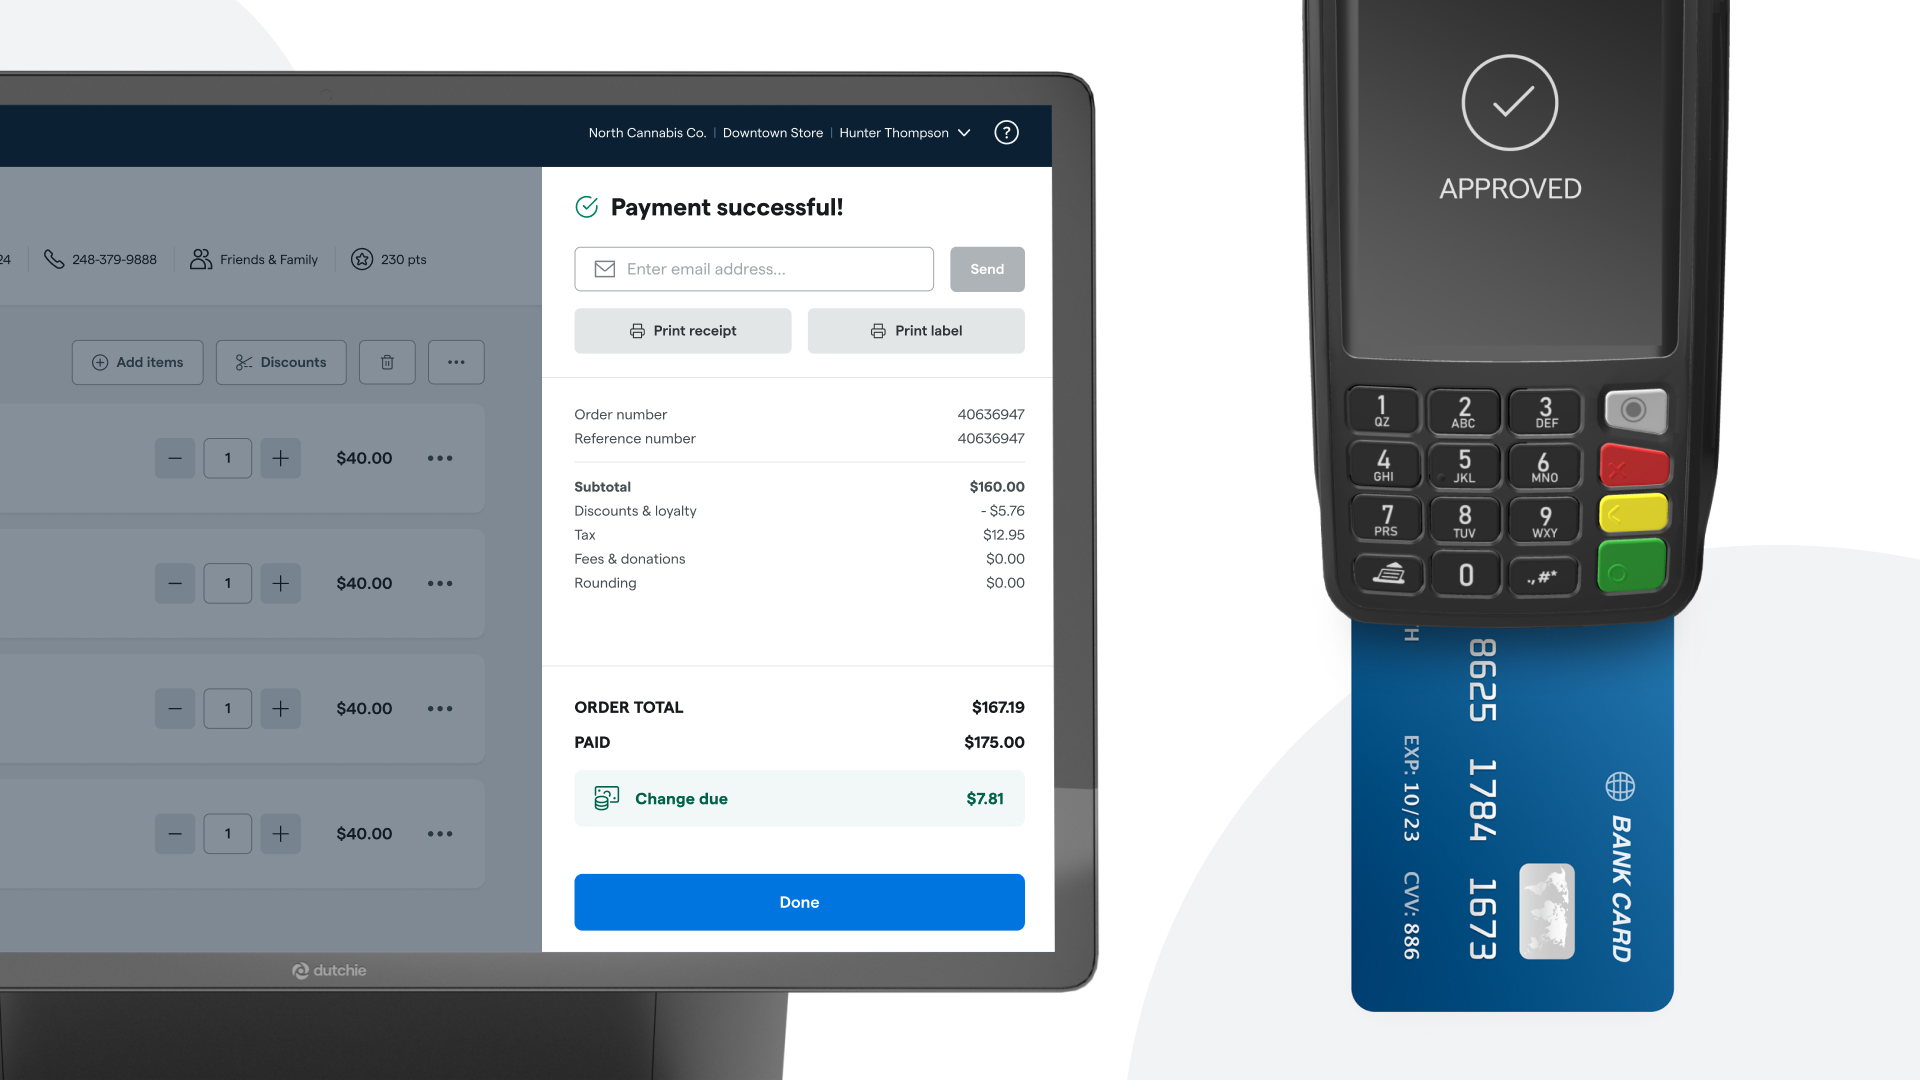 Accept debit card payments in store. Minimize the risk of human error & speed up the checkout process with a terminal that integrates directly with your Dutchie POS.